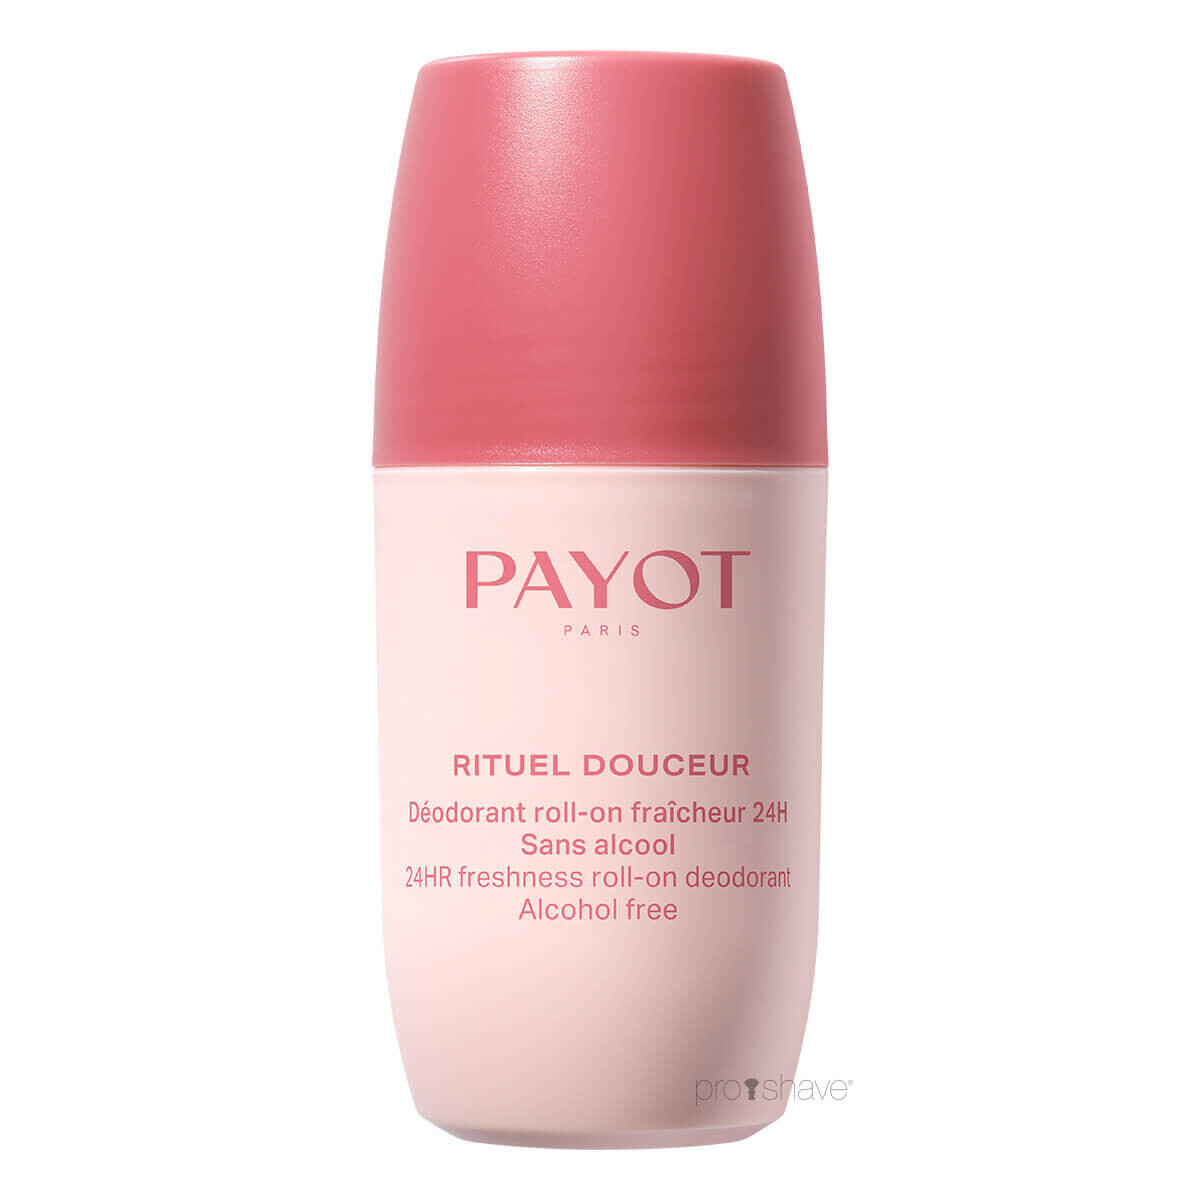 Payot 24hr Freshness Roll-on Deodorant Alcohol free, 75 ml.